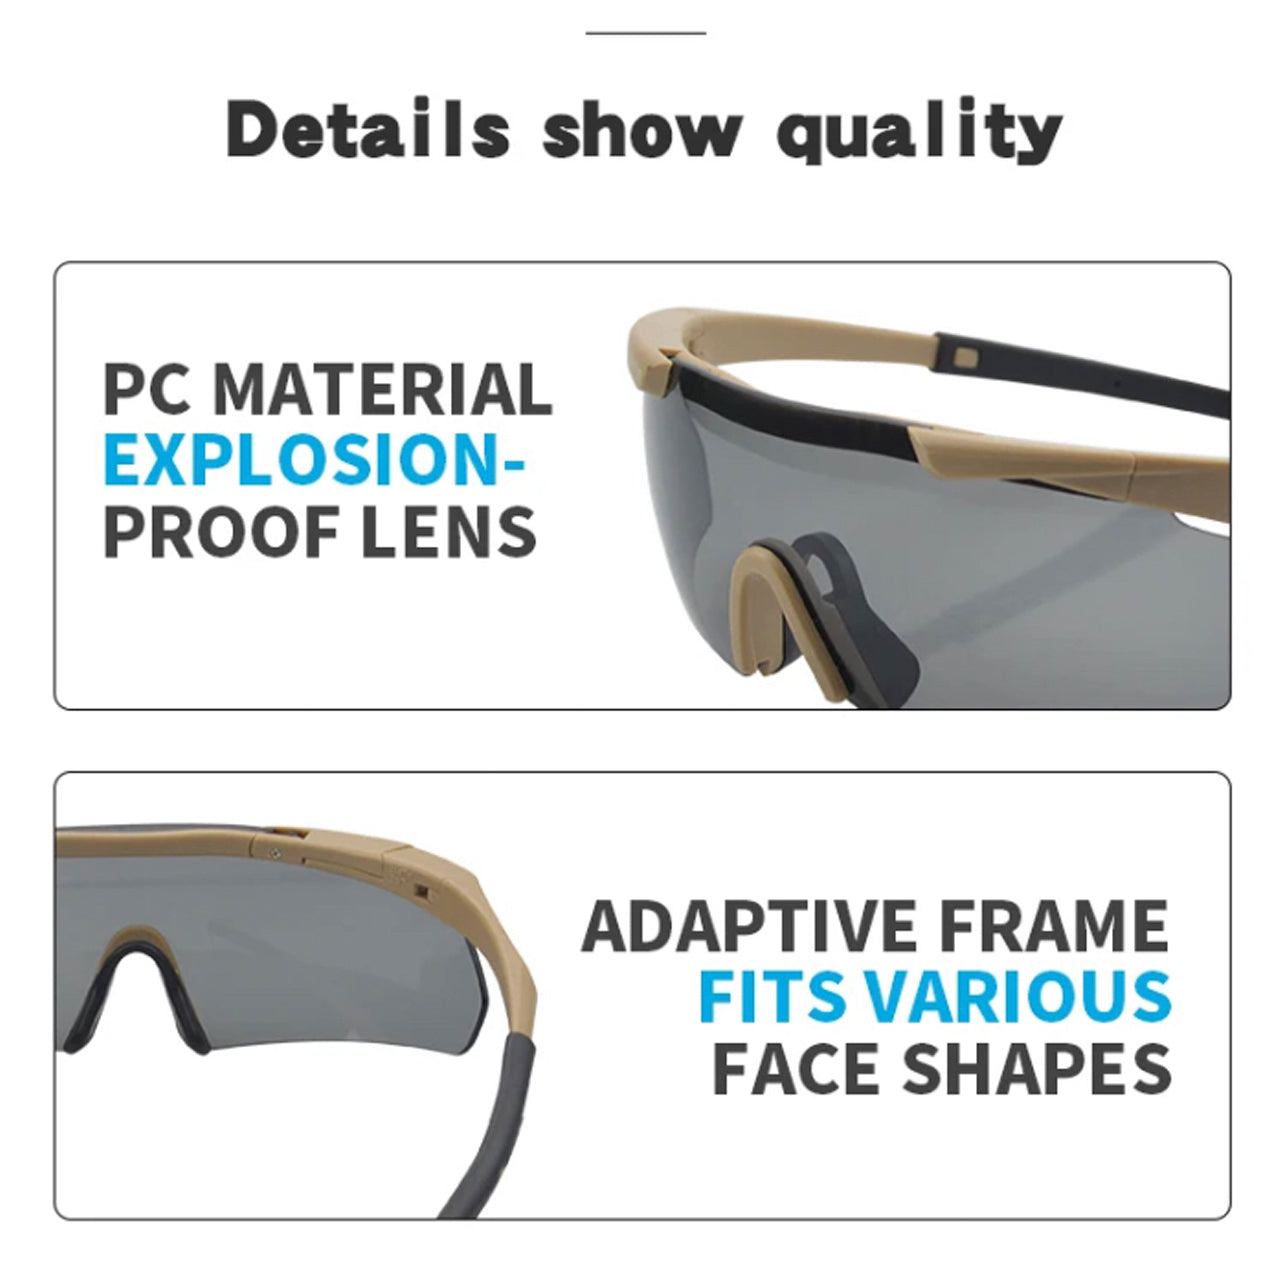 UV Protection multi style Frame style Tactical Eyewear Cycling Hunting Hiking Outdoor sport Military Cadets Frame Material: Acetate Gender: Unisex Lens Width: 155mm Lens Height: 42cm Lenses Optical Attribute: UV400 Frame Color: black, tan, green Lenses Material: PC lens Tactical Glasses www.defenceqstore.com.au